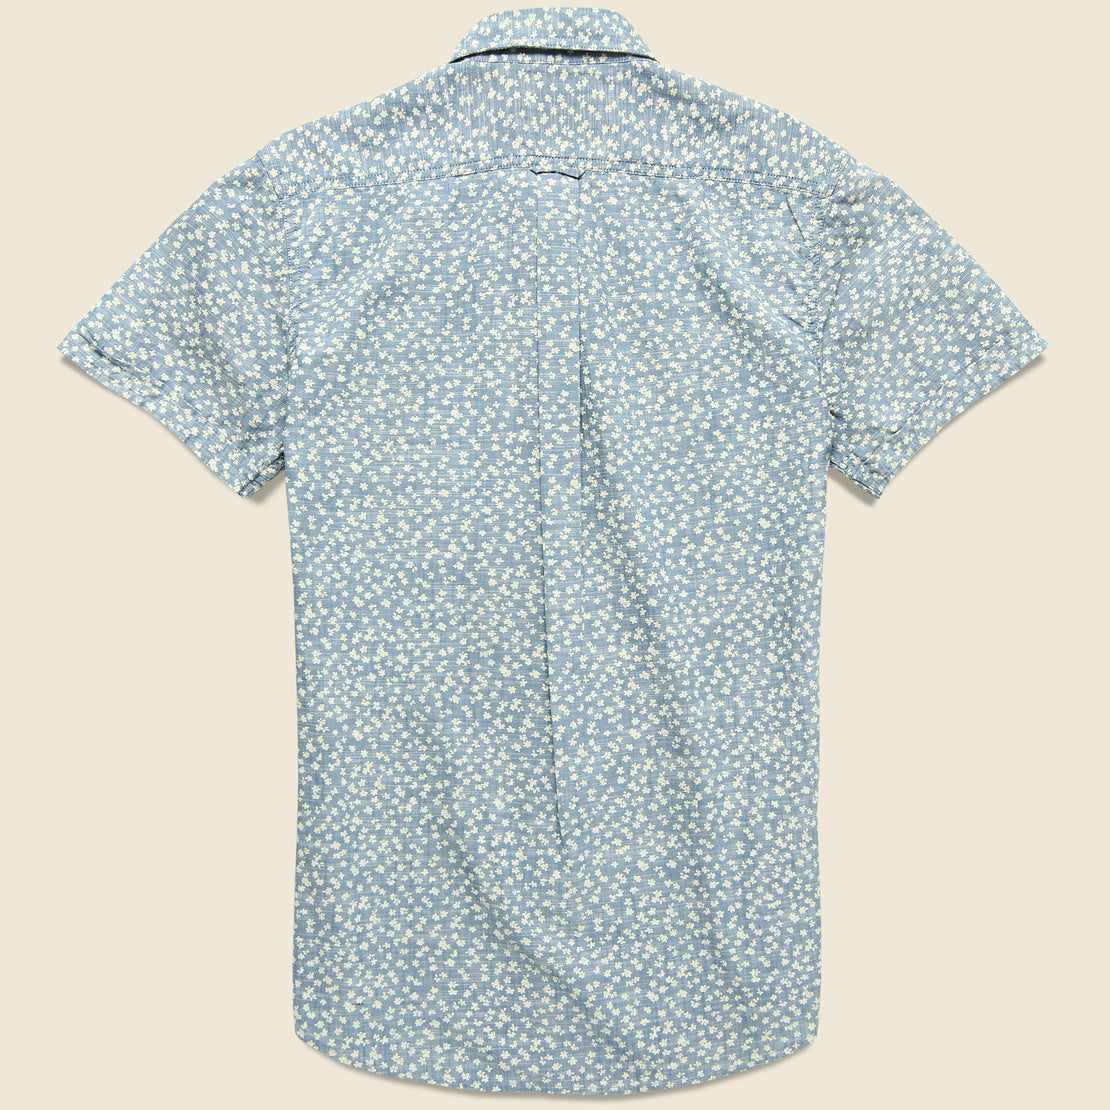 Drayton Shirt - Aegean Blue - Grayers - STAG Provisions - Tops - S/S Woven - Floral